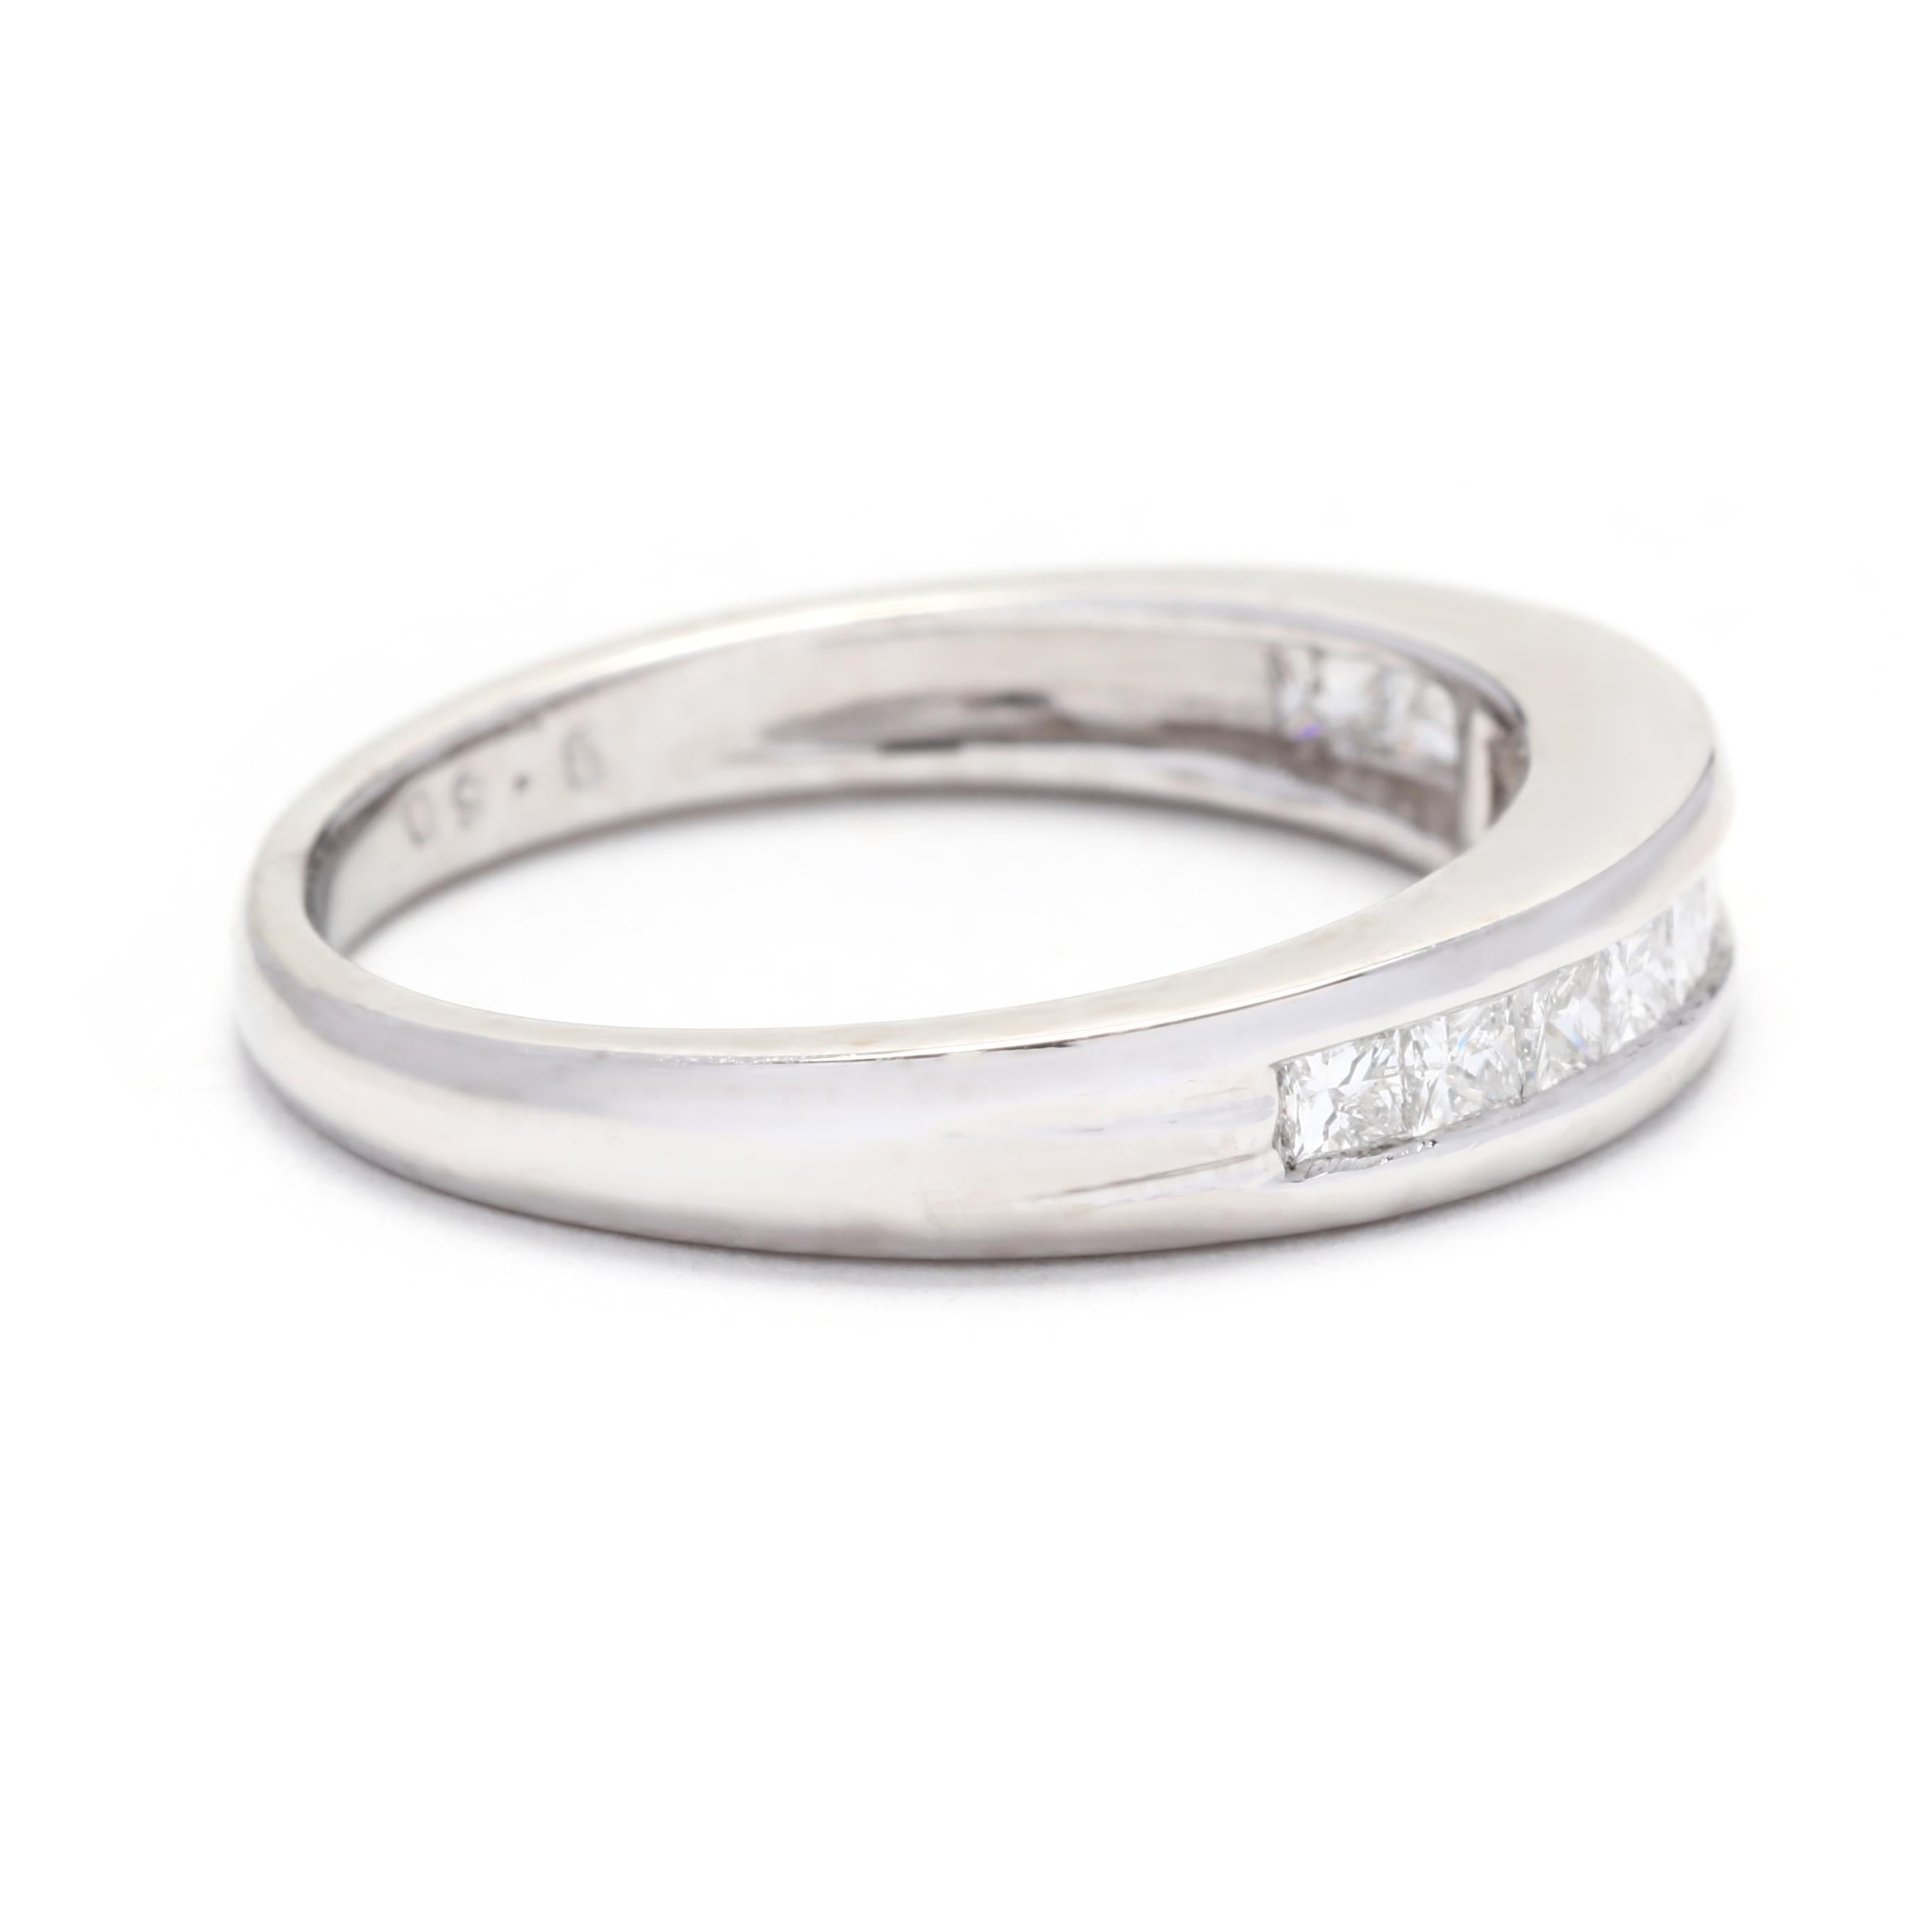 This vintage-inspired diamond wedding band is a timeless piece. It features a 0.50ctw princess-cut diamond, set in a channel setting. The band is made from platinum, which gives it a luxurious and durable finish. The ring size is 6.25, making it a